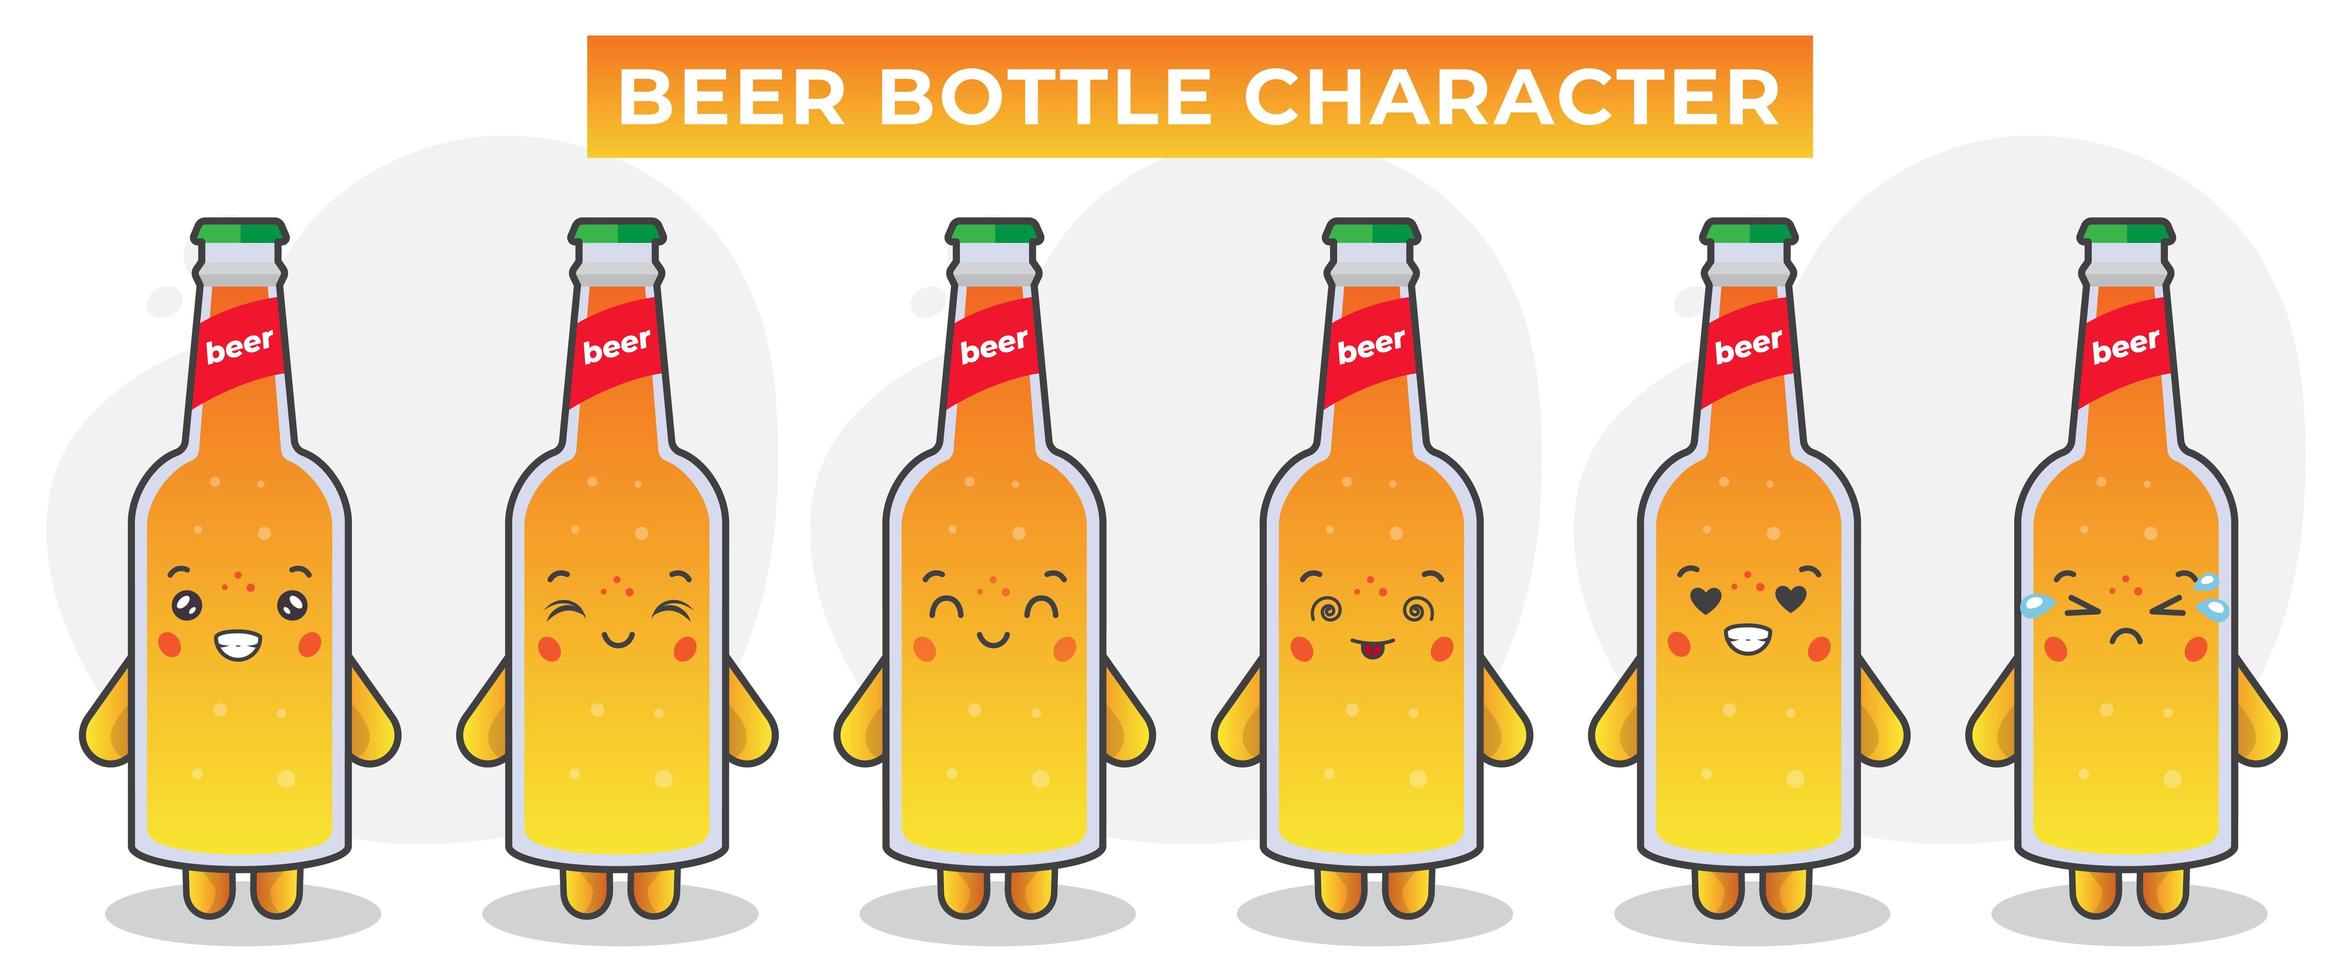 Cute Beer Bottles With Various Expressions vector